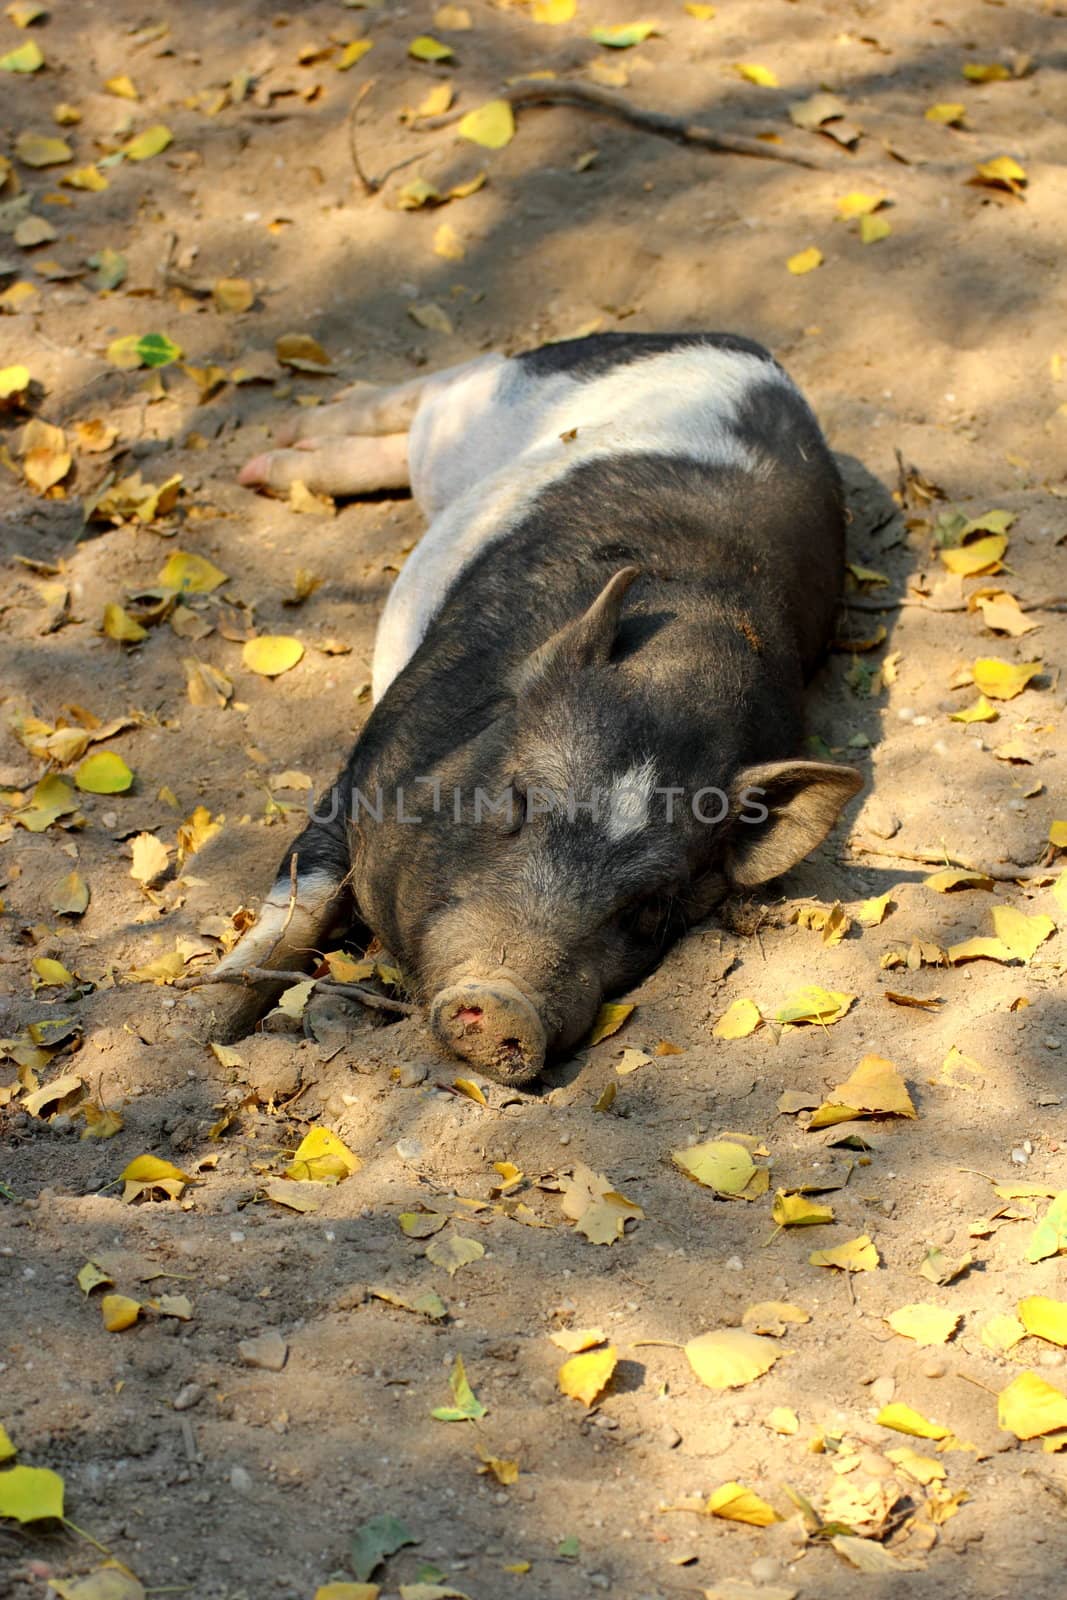 lazy pig sleeping in the shade of some trees